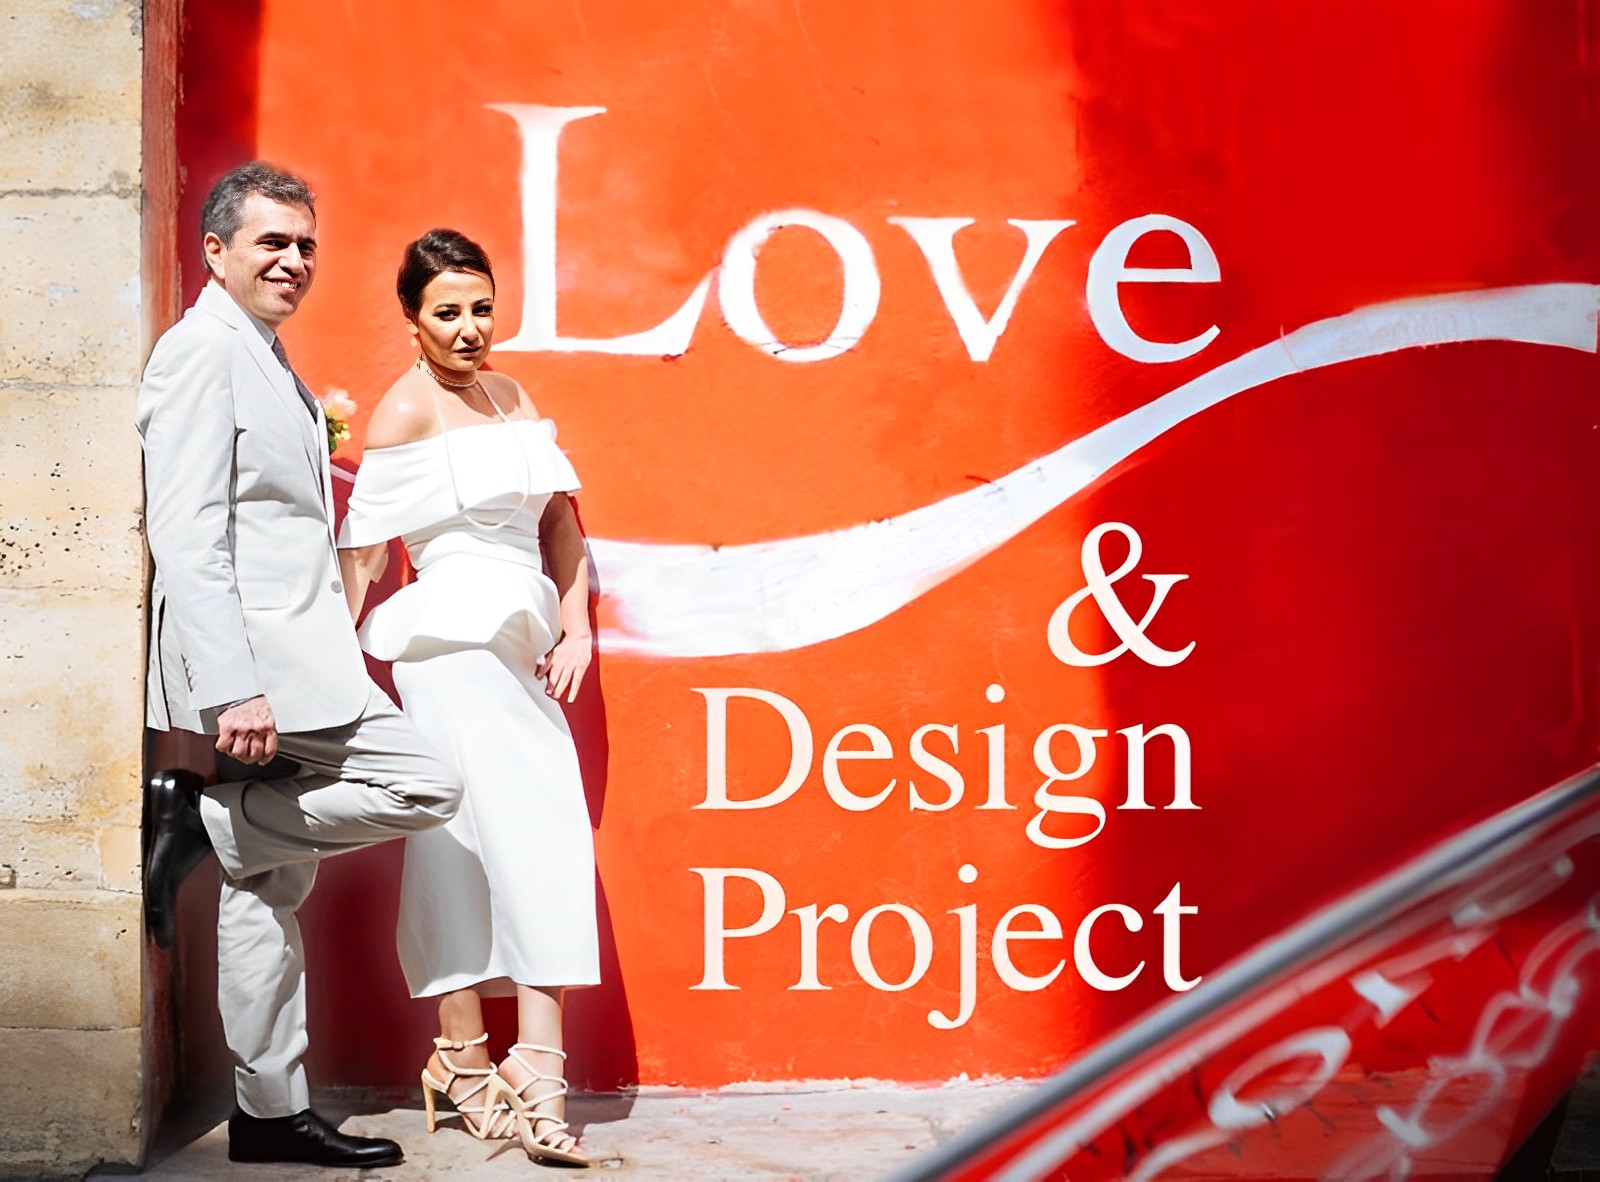 Love & Design Project Podcast on PBN